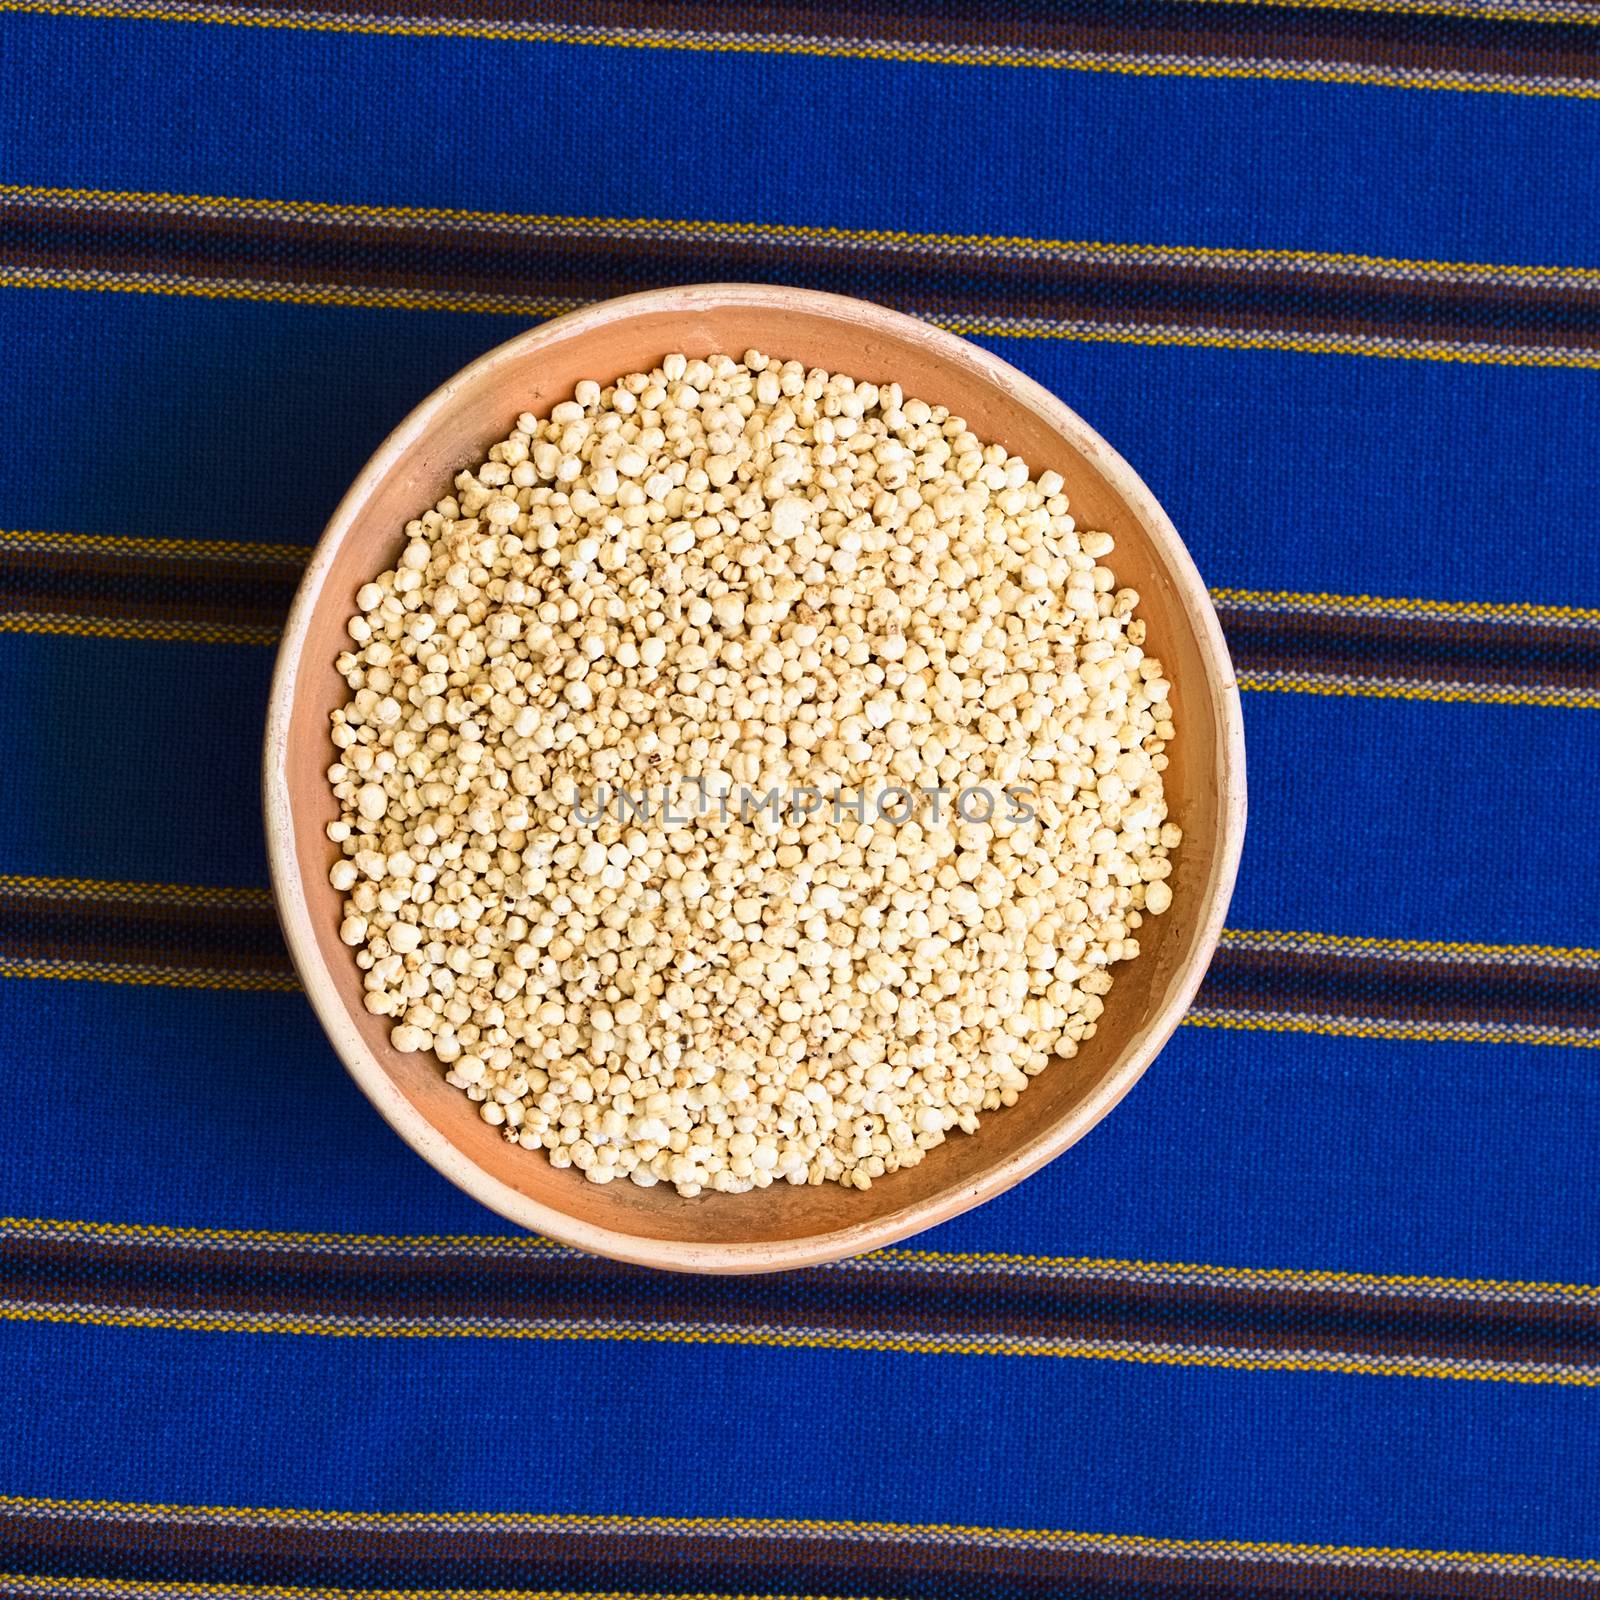 Popped quinoa cereal in clay bowl on blue striped fabric, photographed with natural light 